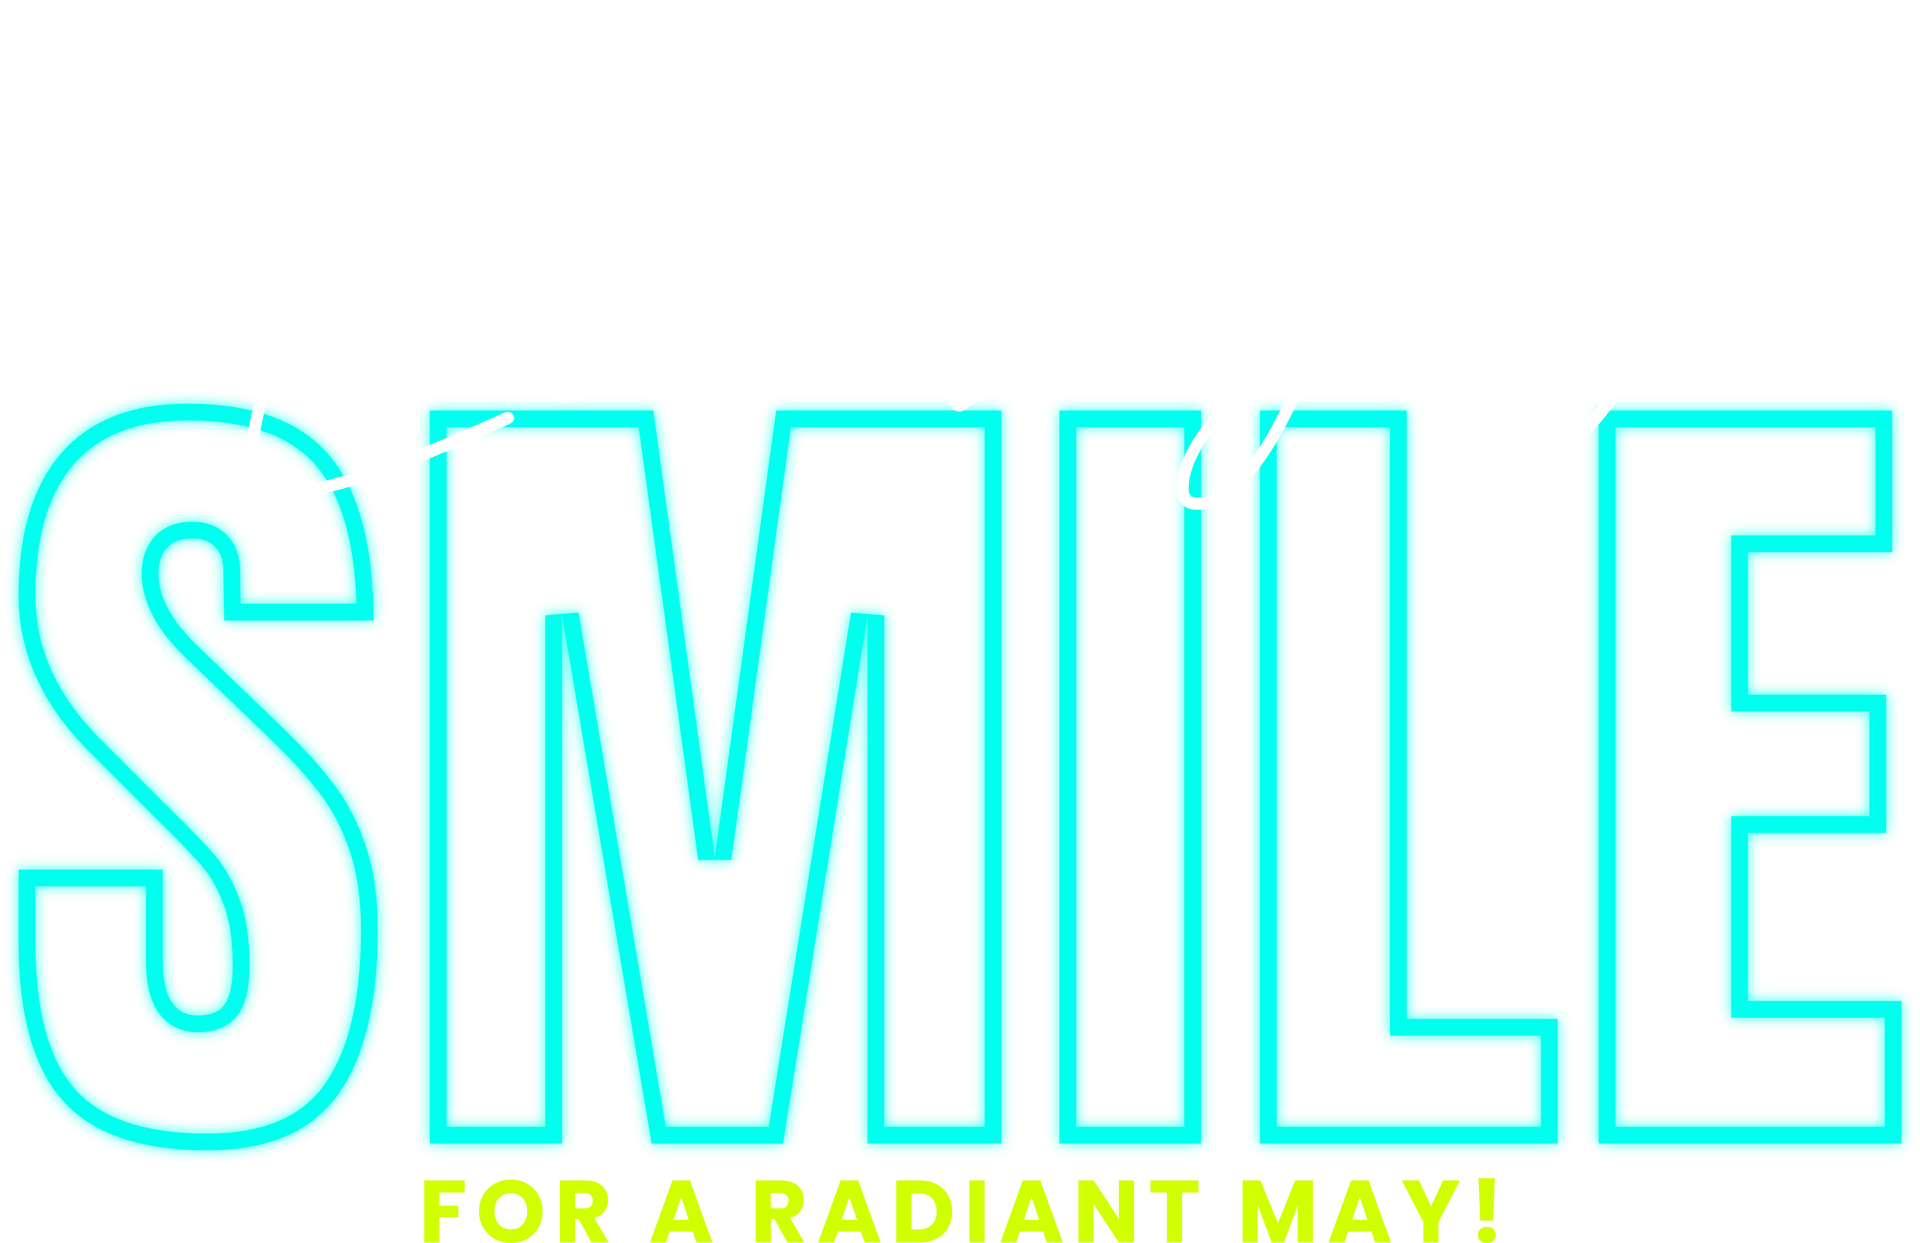 Text that says Elevate your Smile for a Radiant May!